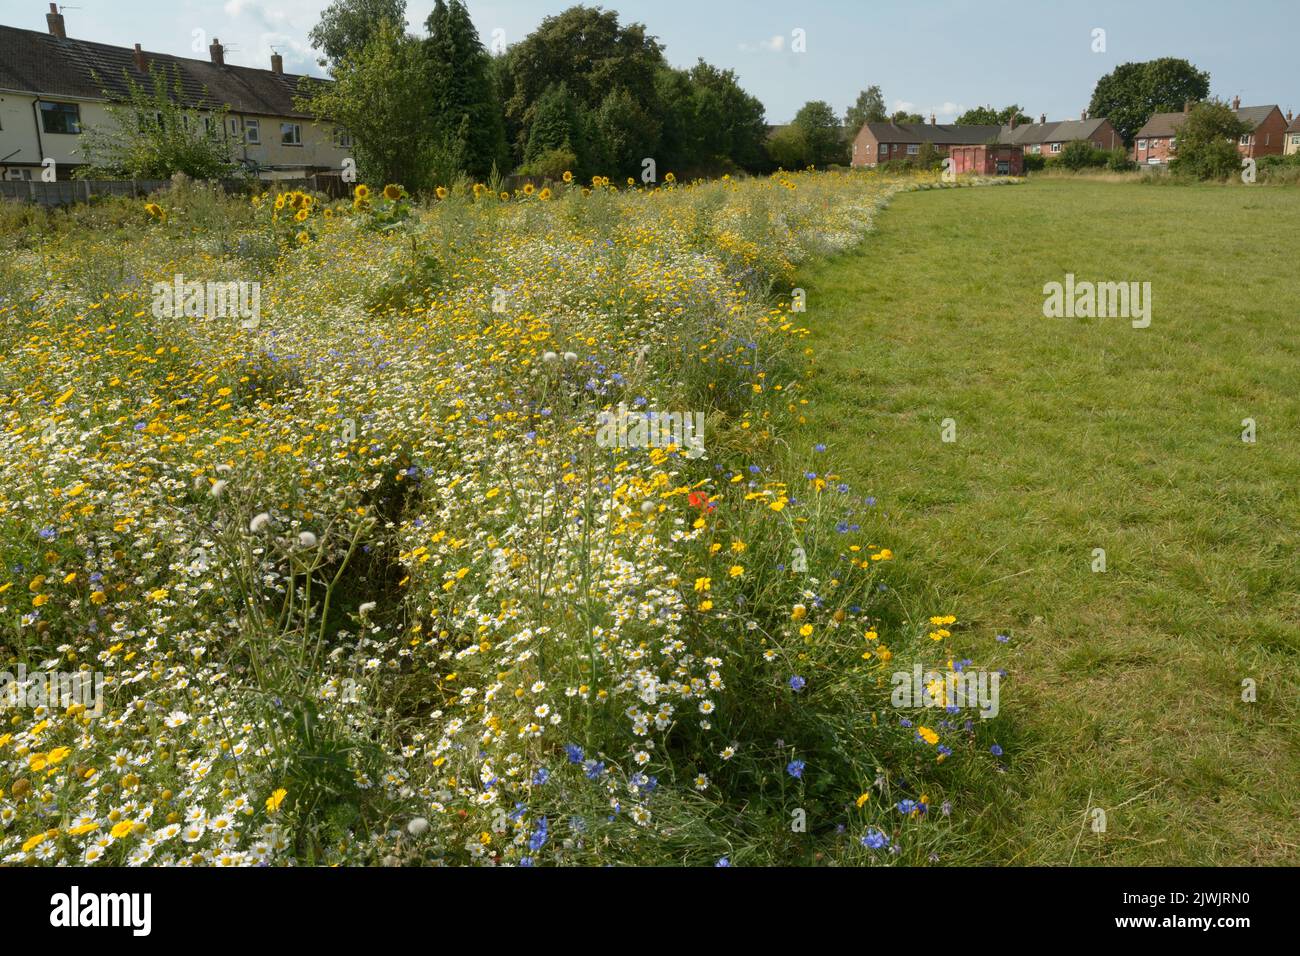 Wild seed sowing. Flowers in bloom in a public space in Wythenshawe, Manchester. Stock Photo